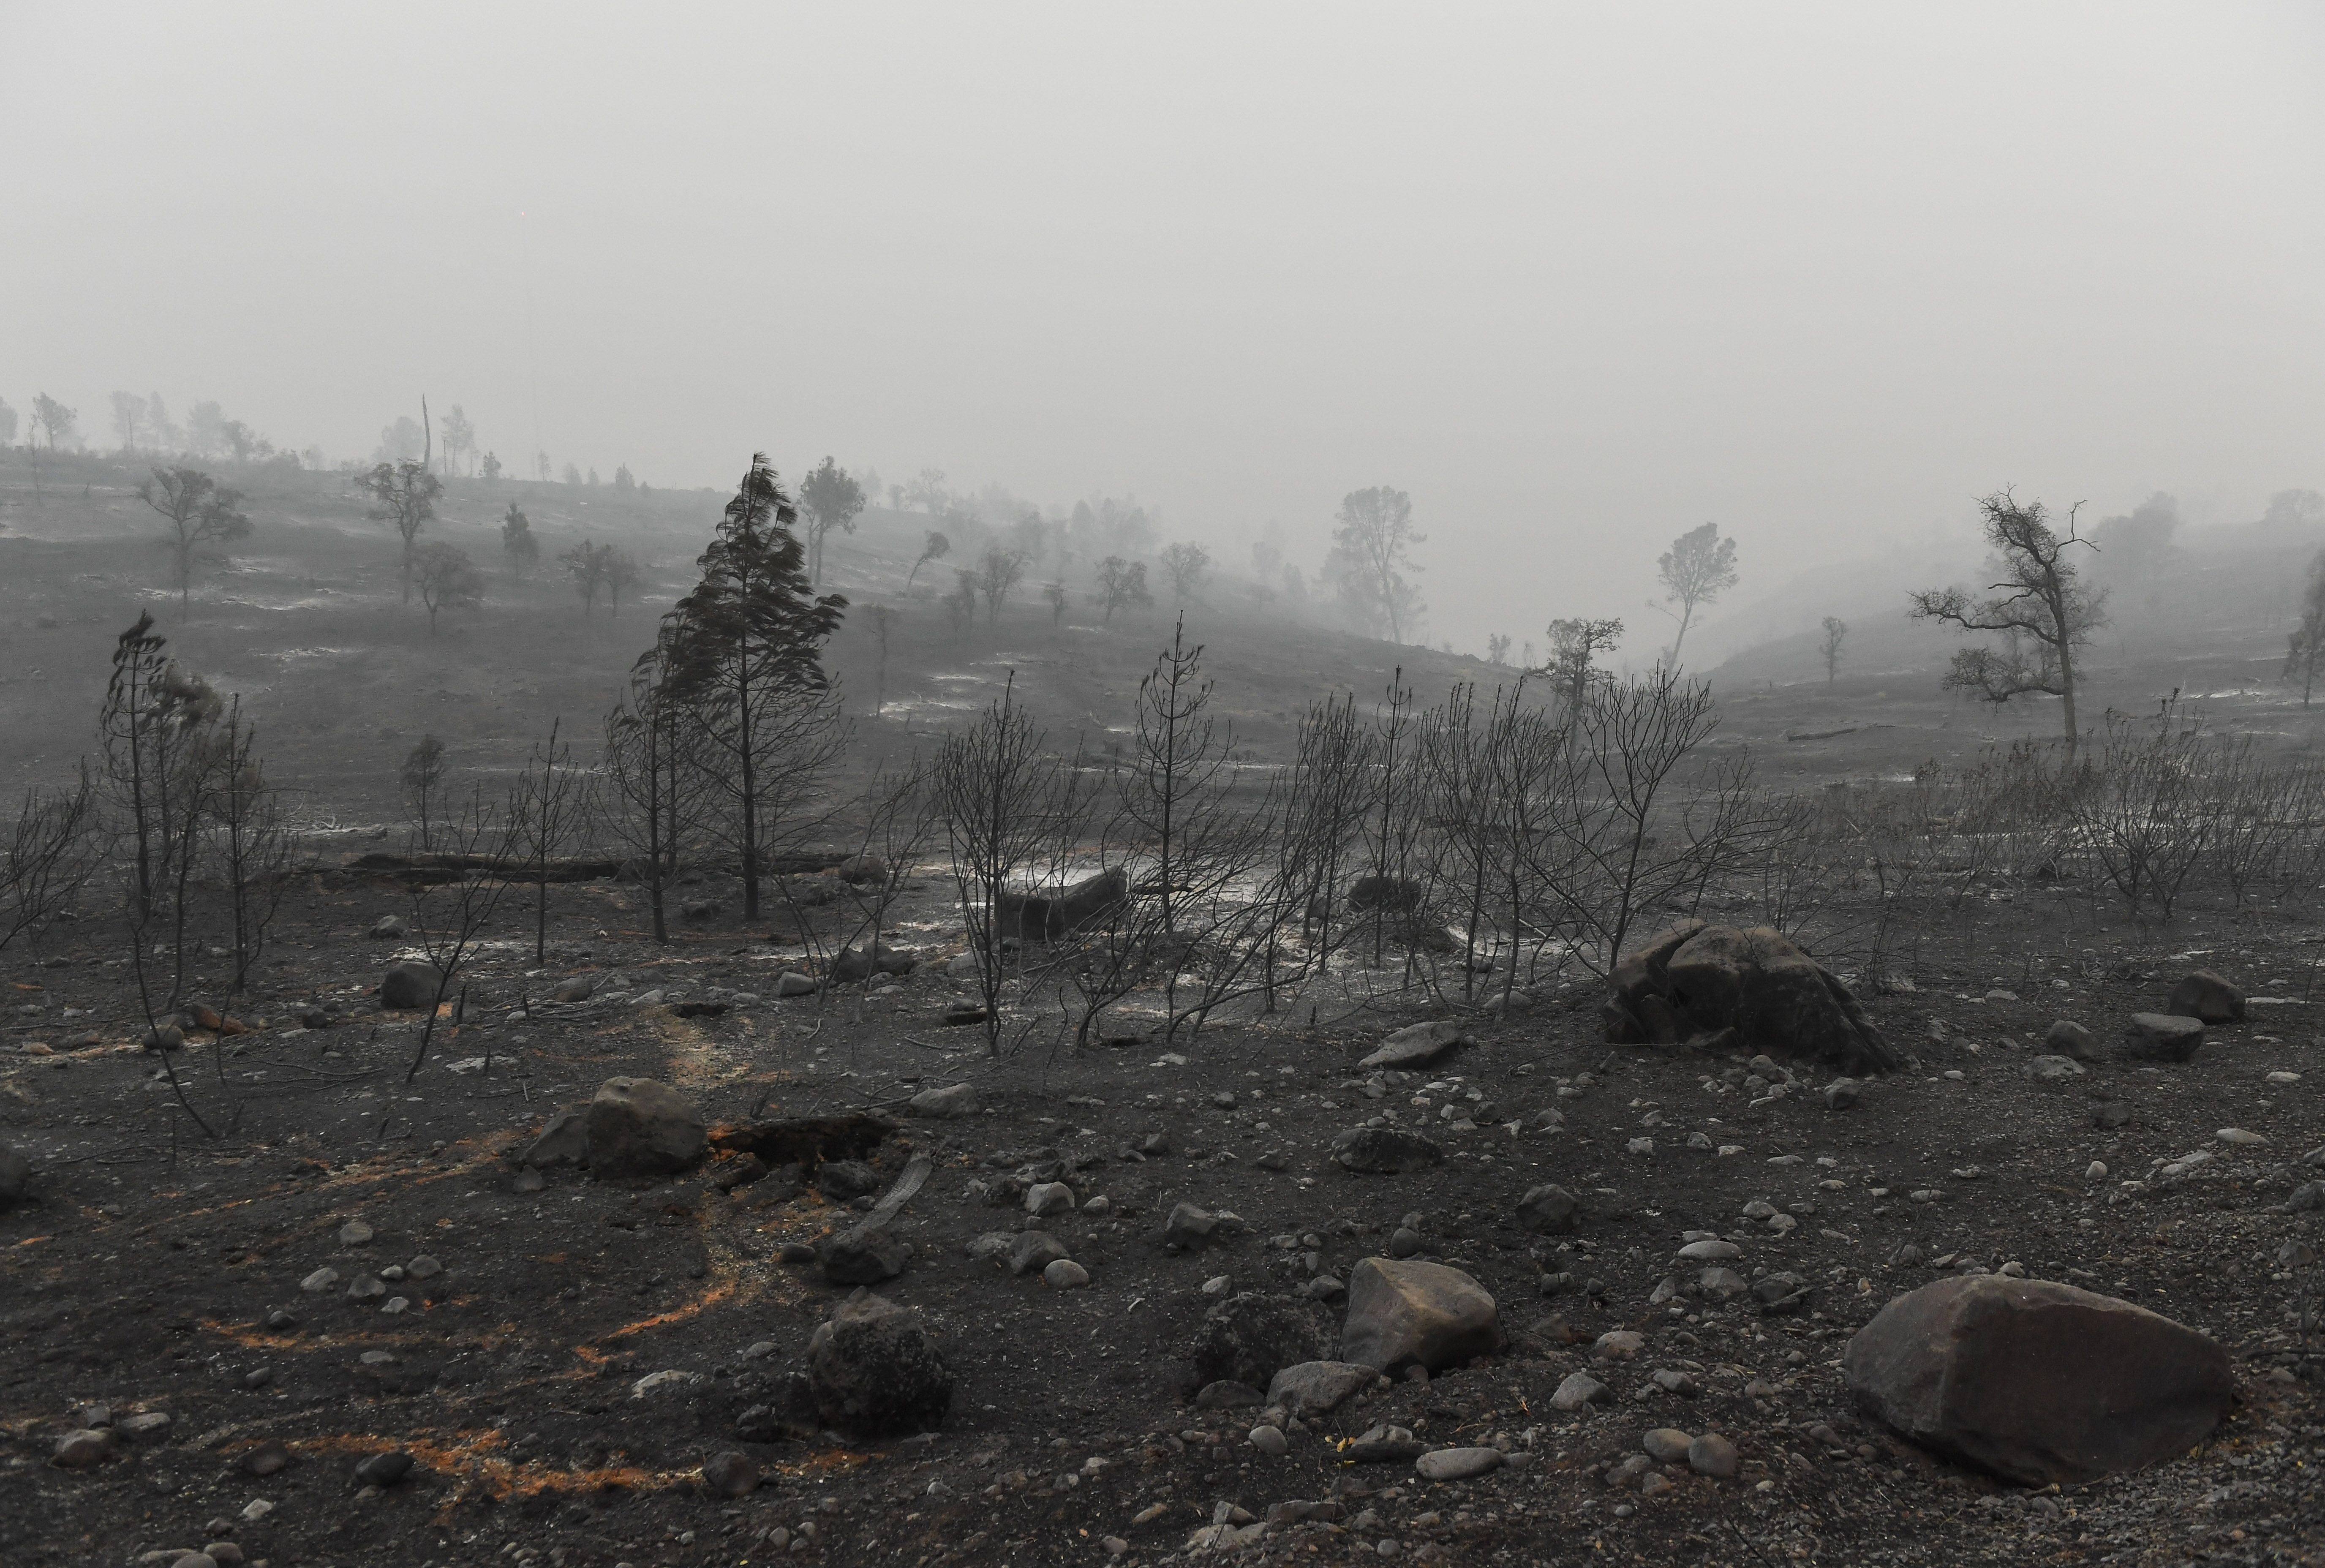 Scene of destruction after the Camp Fire in Paradise, California.